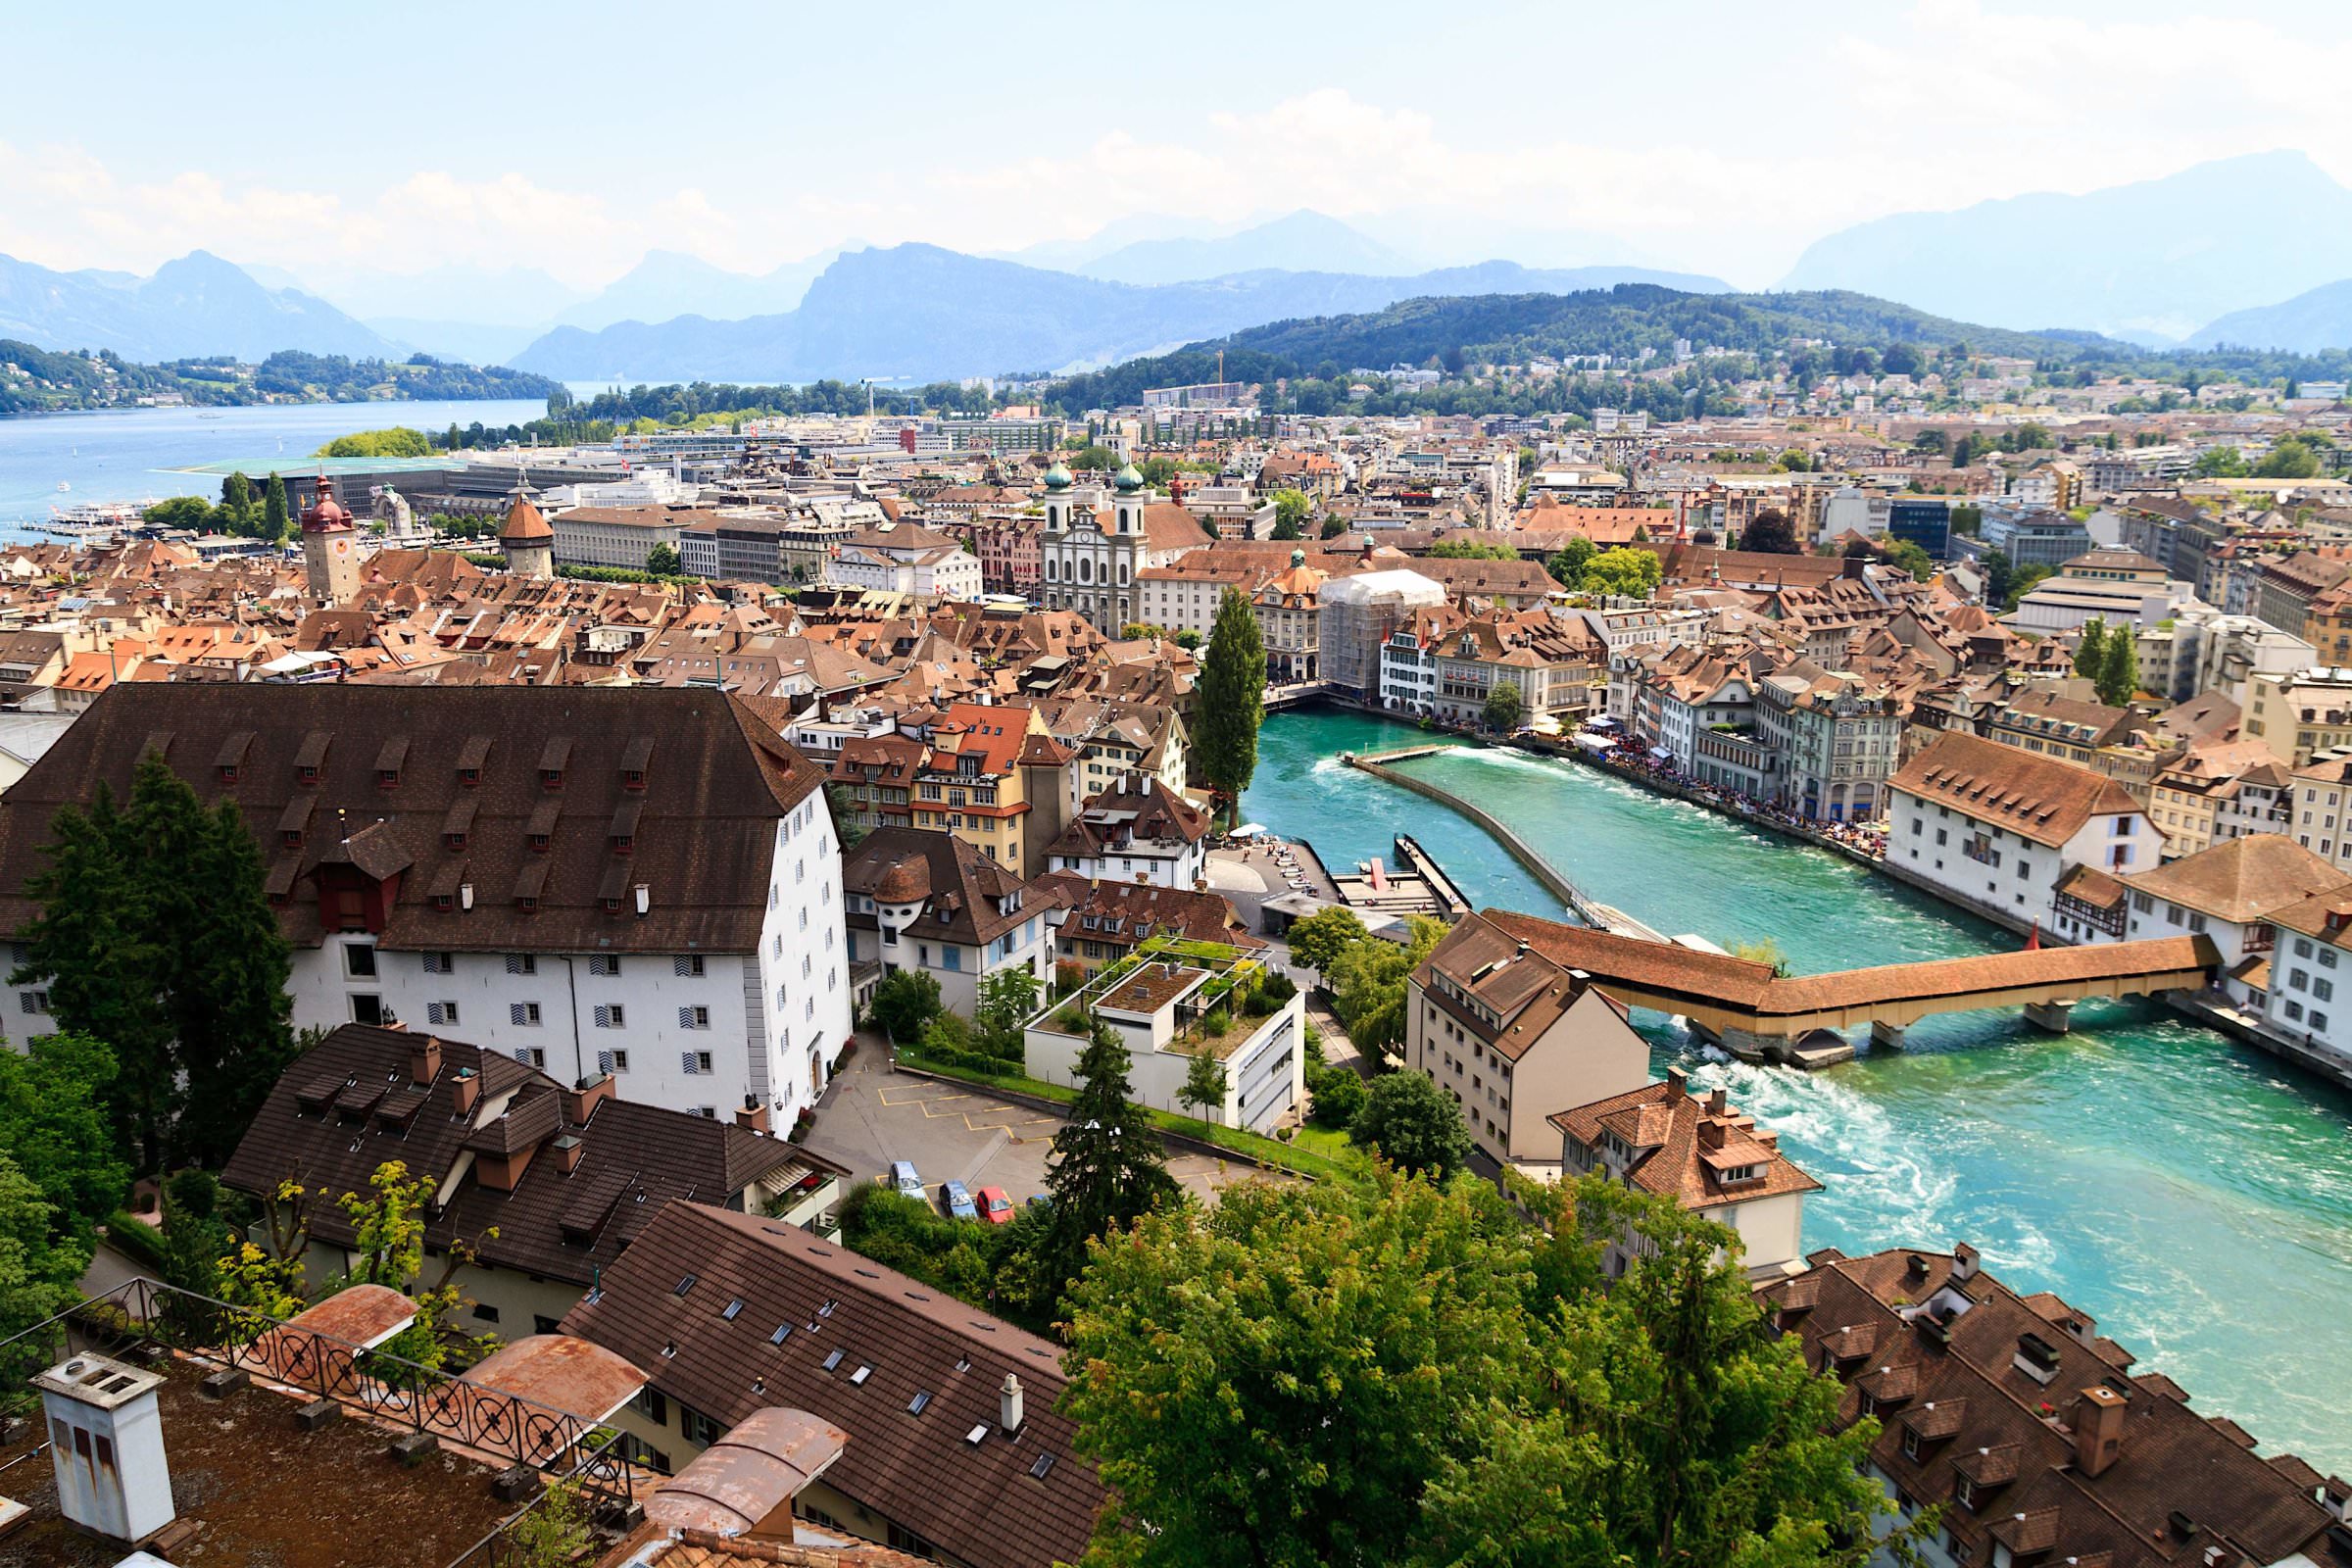 An ideal 8 night Europe itinerary for a Family getaway